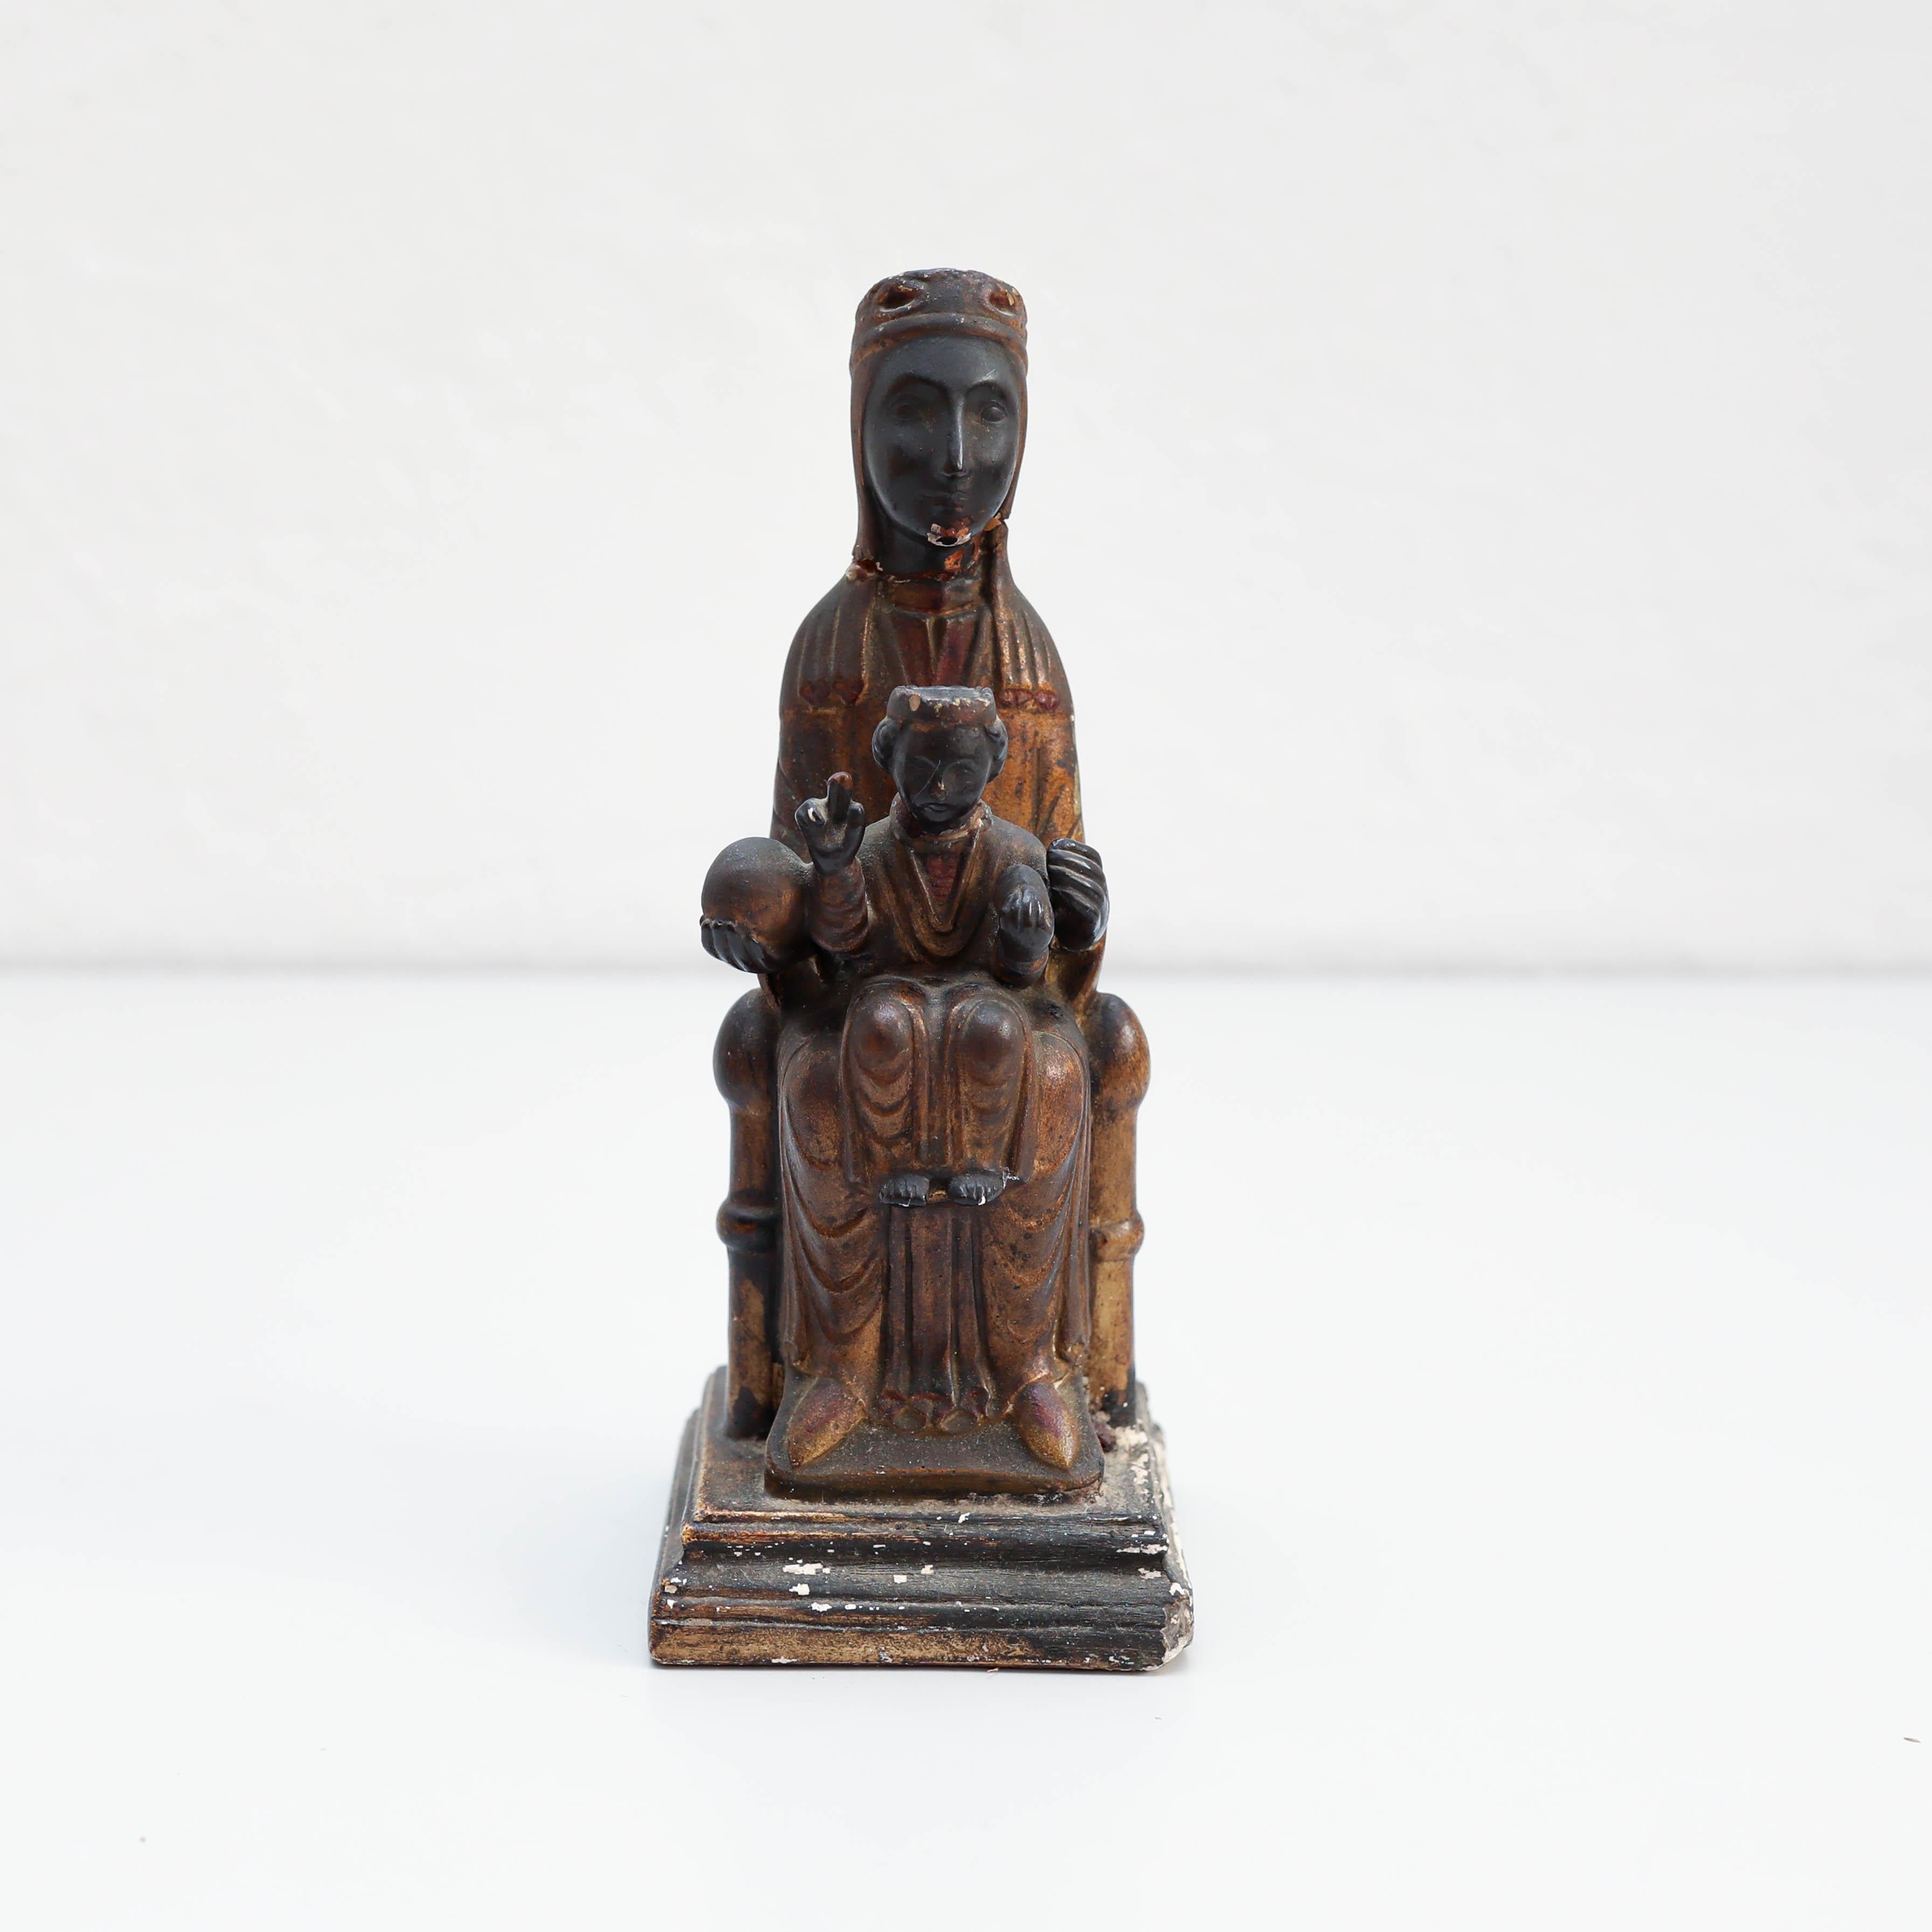 Spanish wood Montserrat virgin statue made of painted.

Made in Barcelona, Spain.

The Classic religious figure is beautifully ornate and has wonderful details throughout her robe, face, hair and hands. 

In original condition, with minor wear